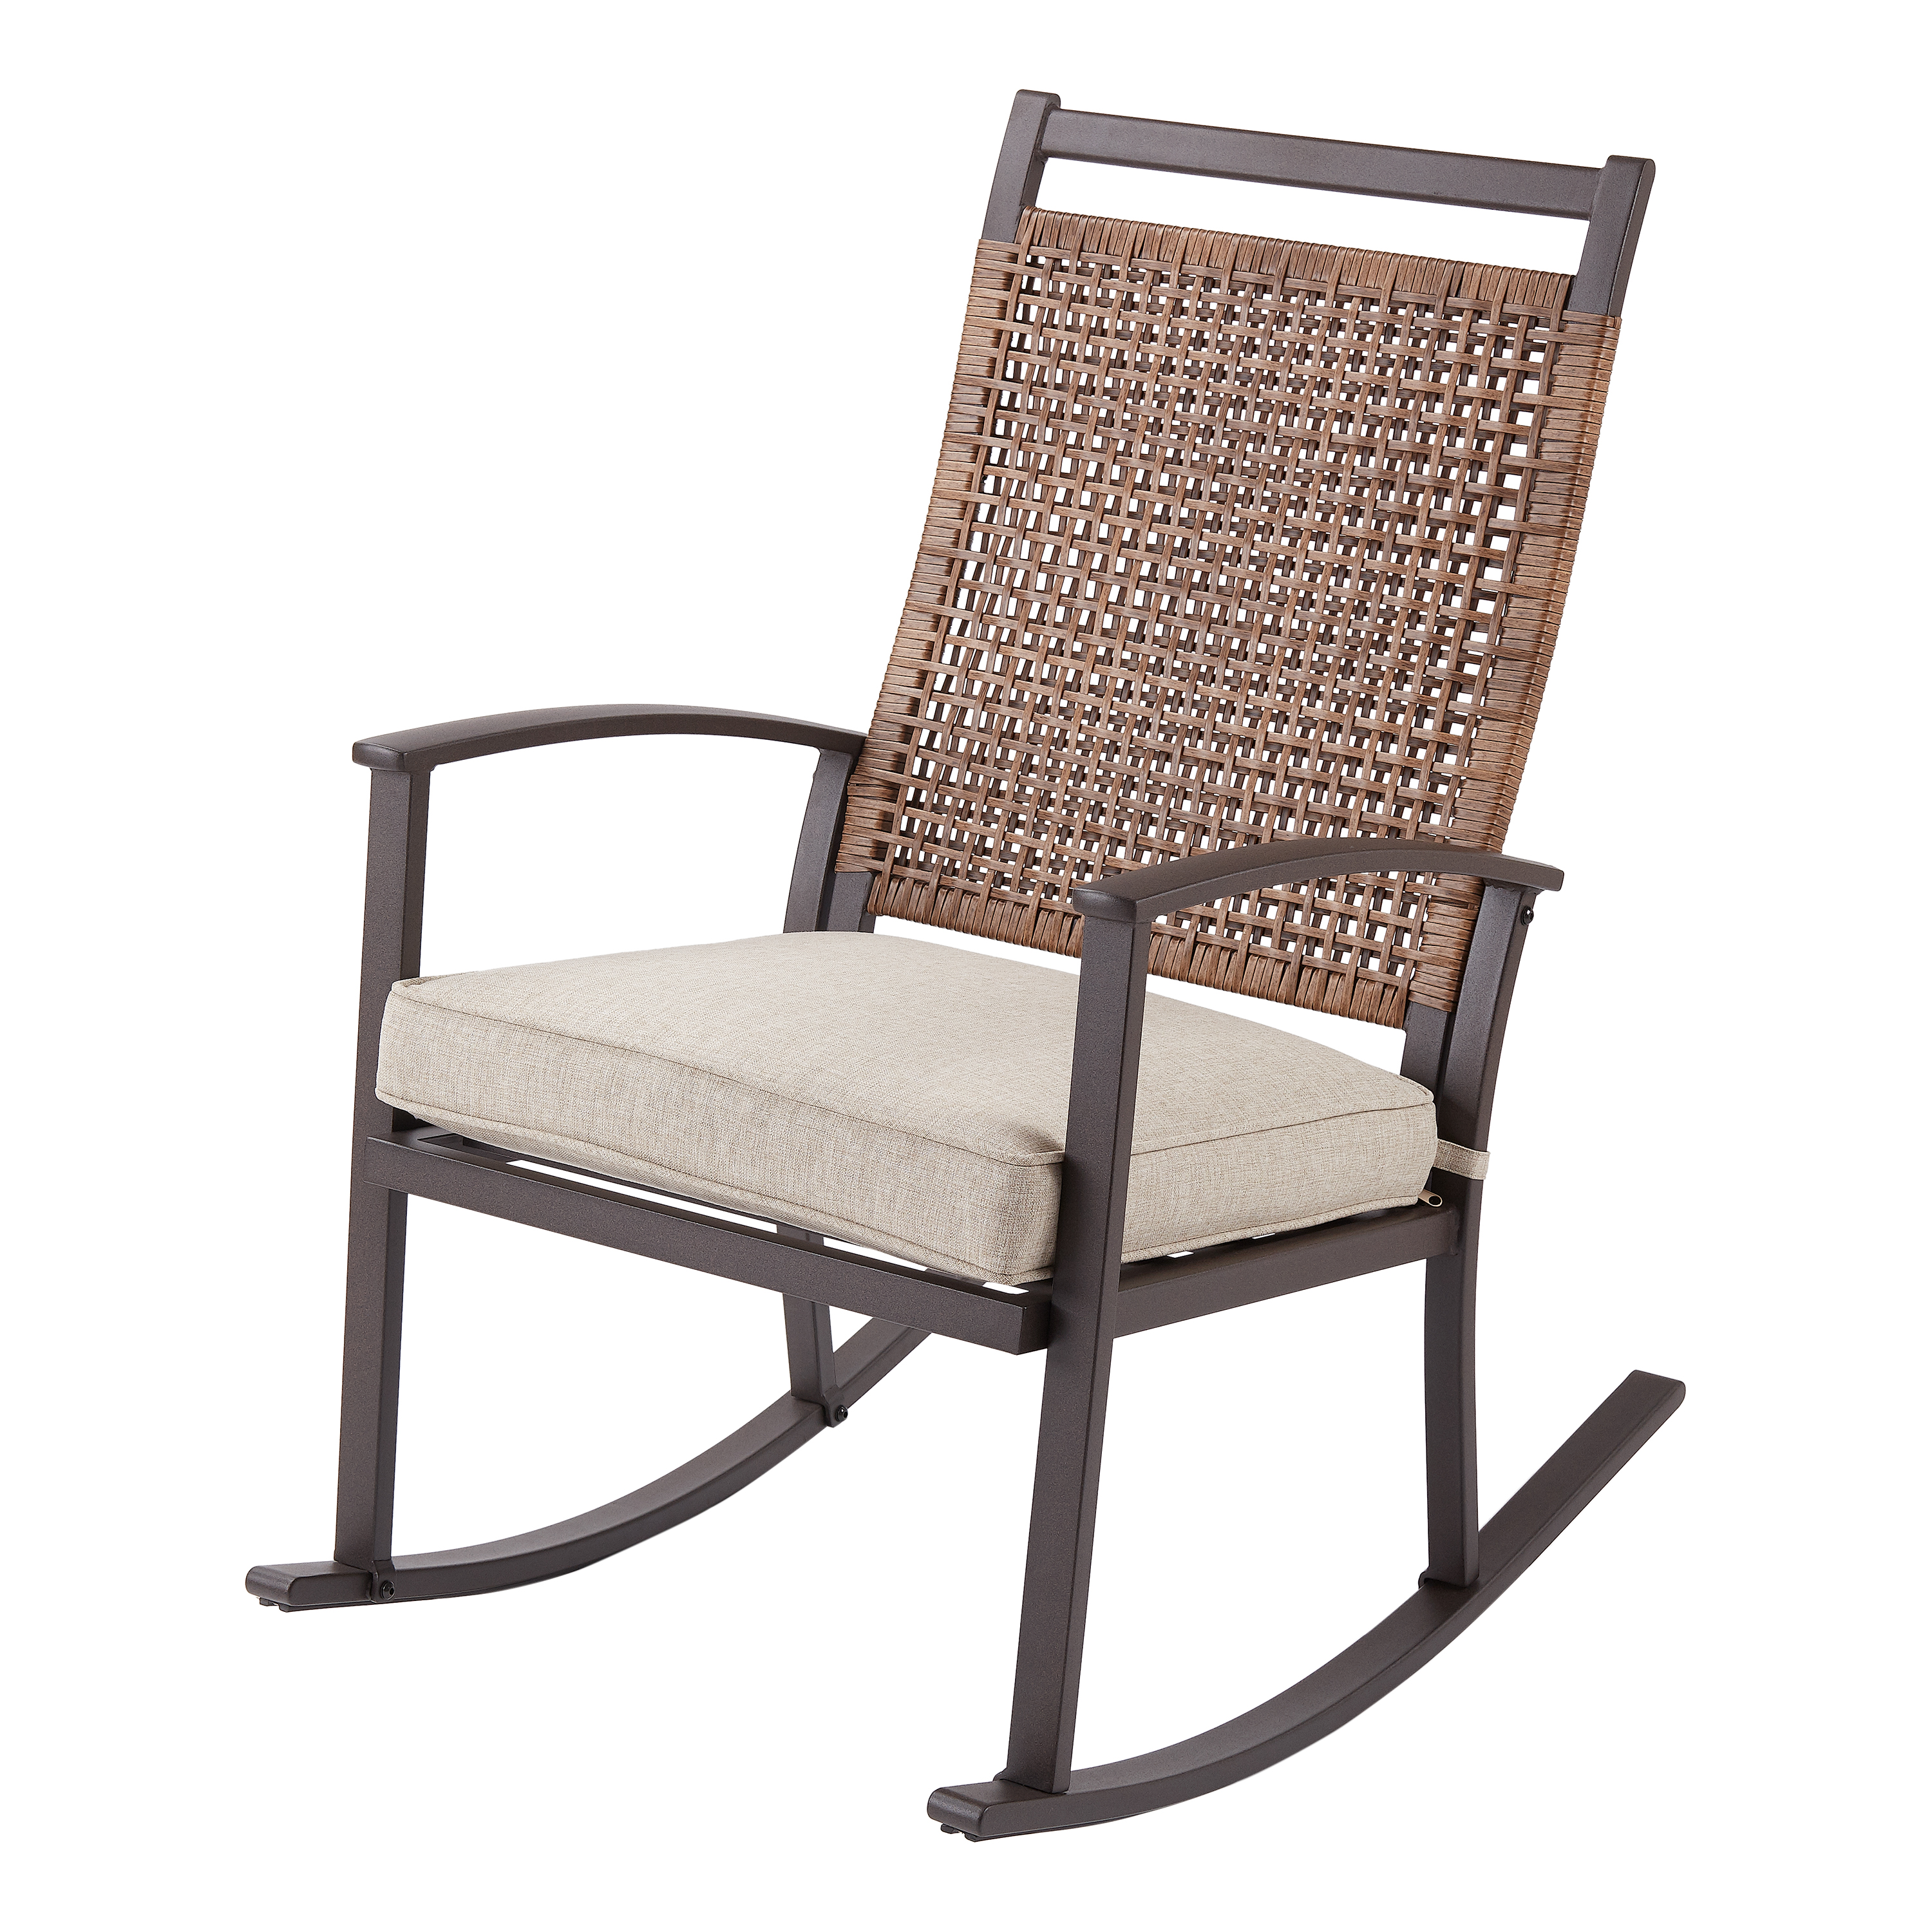 Better Homes & Gardens Heritage Outdoor Wicker Rocking Chair with Beige Cushion - image 1 of 4